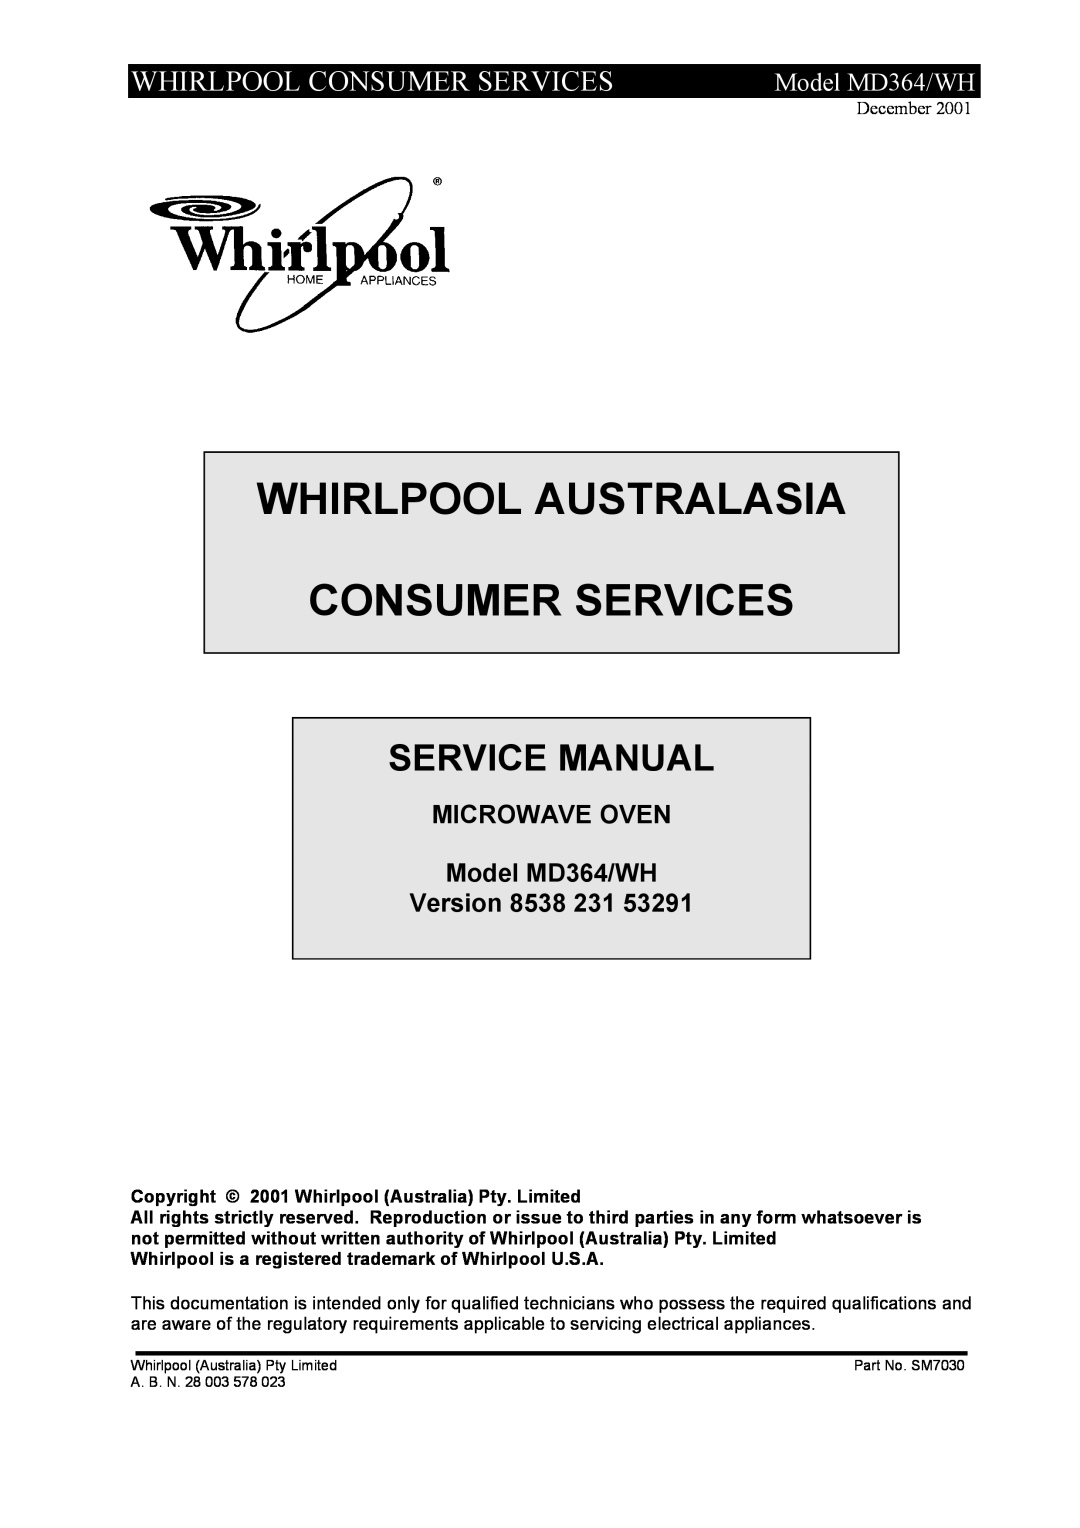 Whirlpool service manual Whirlpool Consumer Services, MICROWAVE OVEN Model MD364/WH Version 8538 